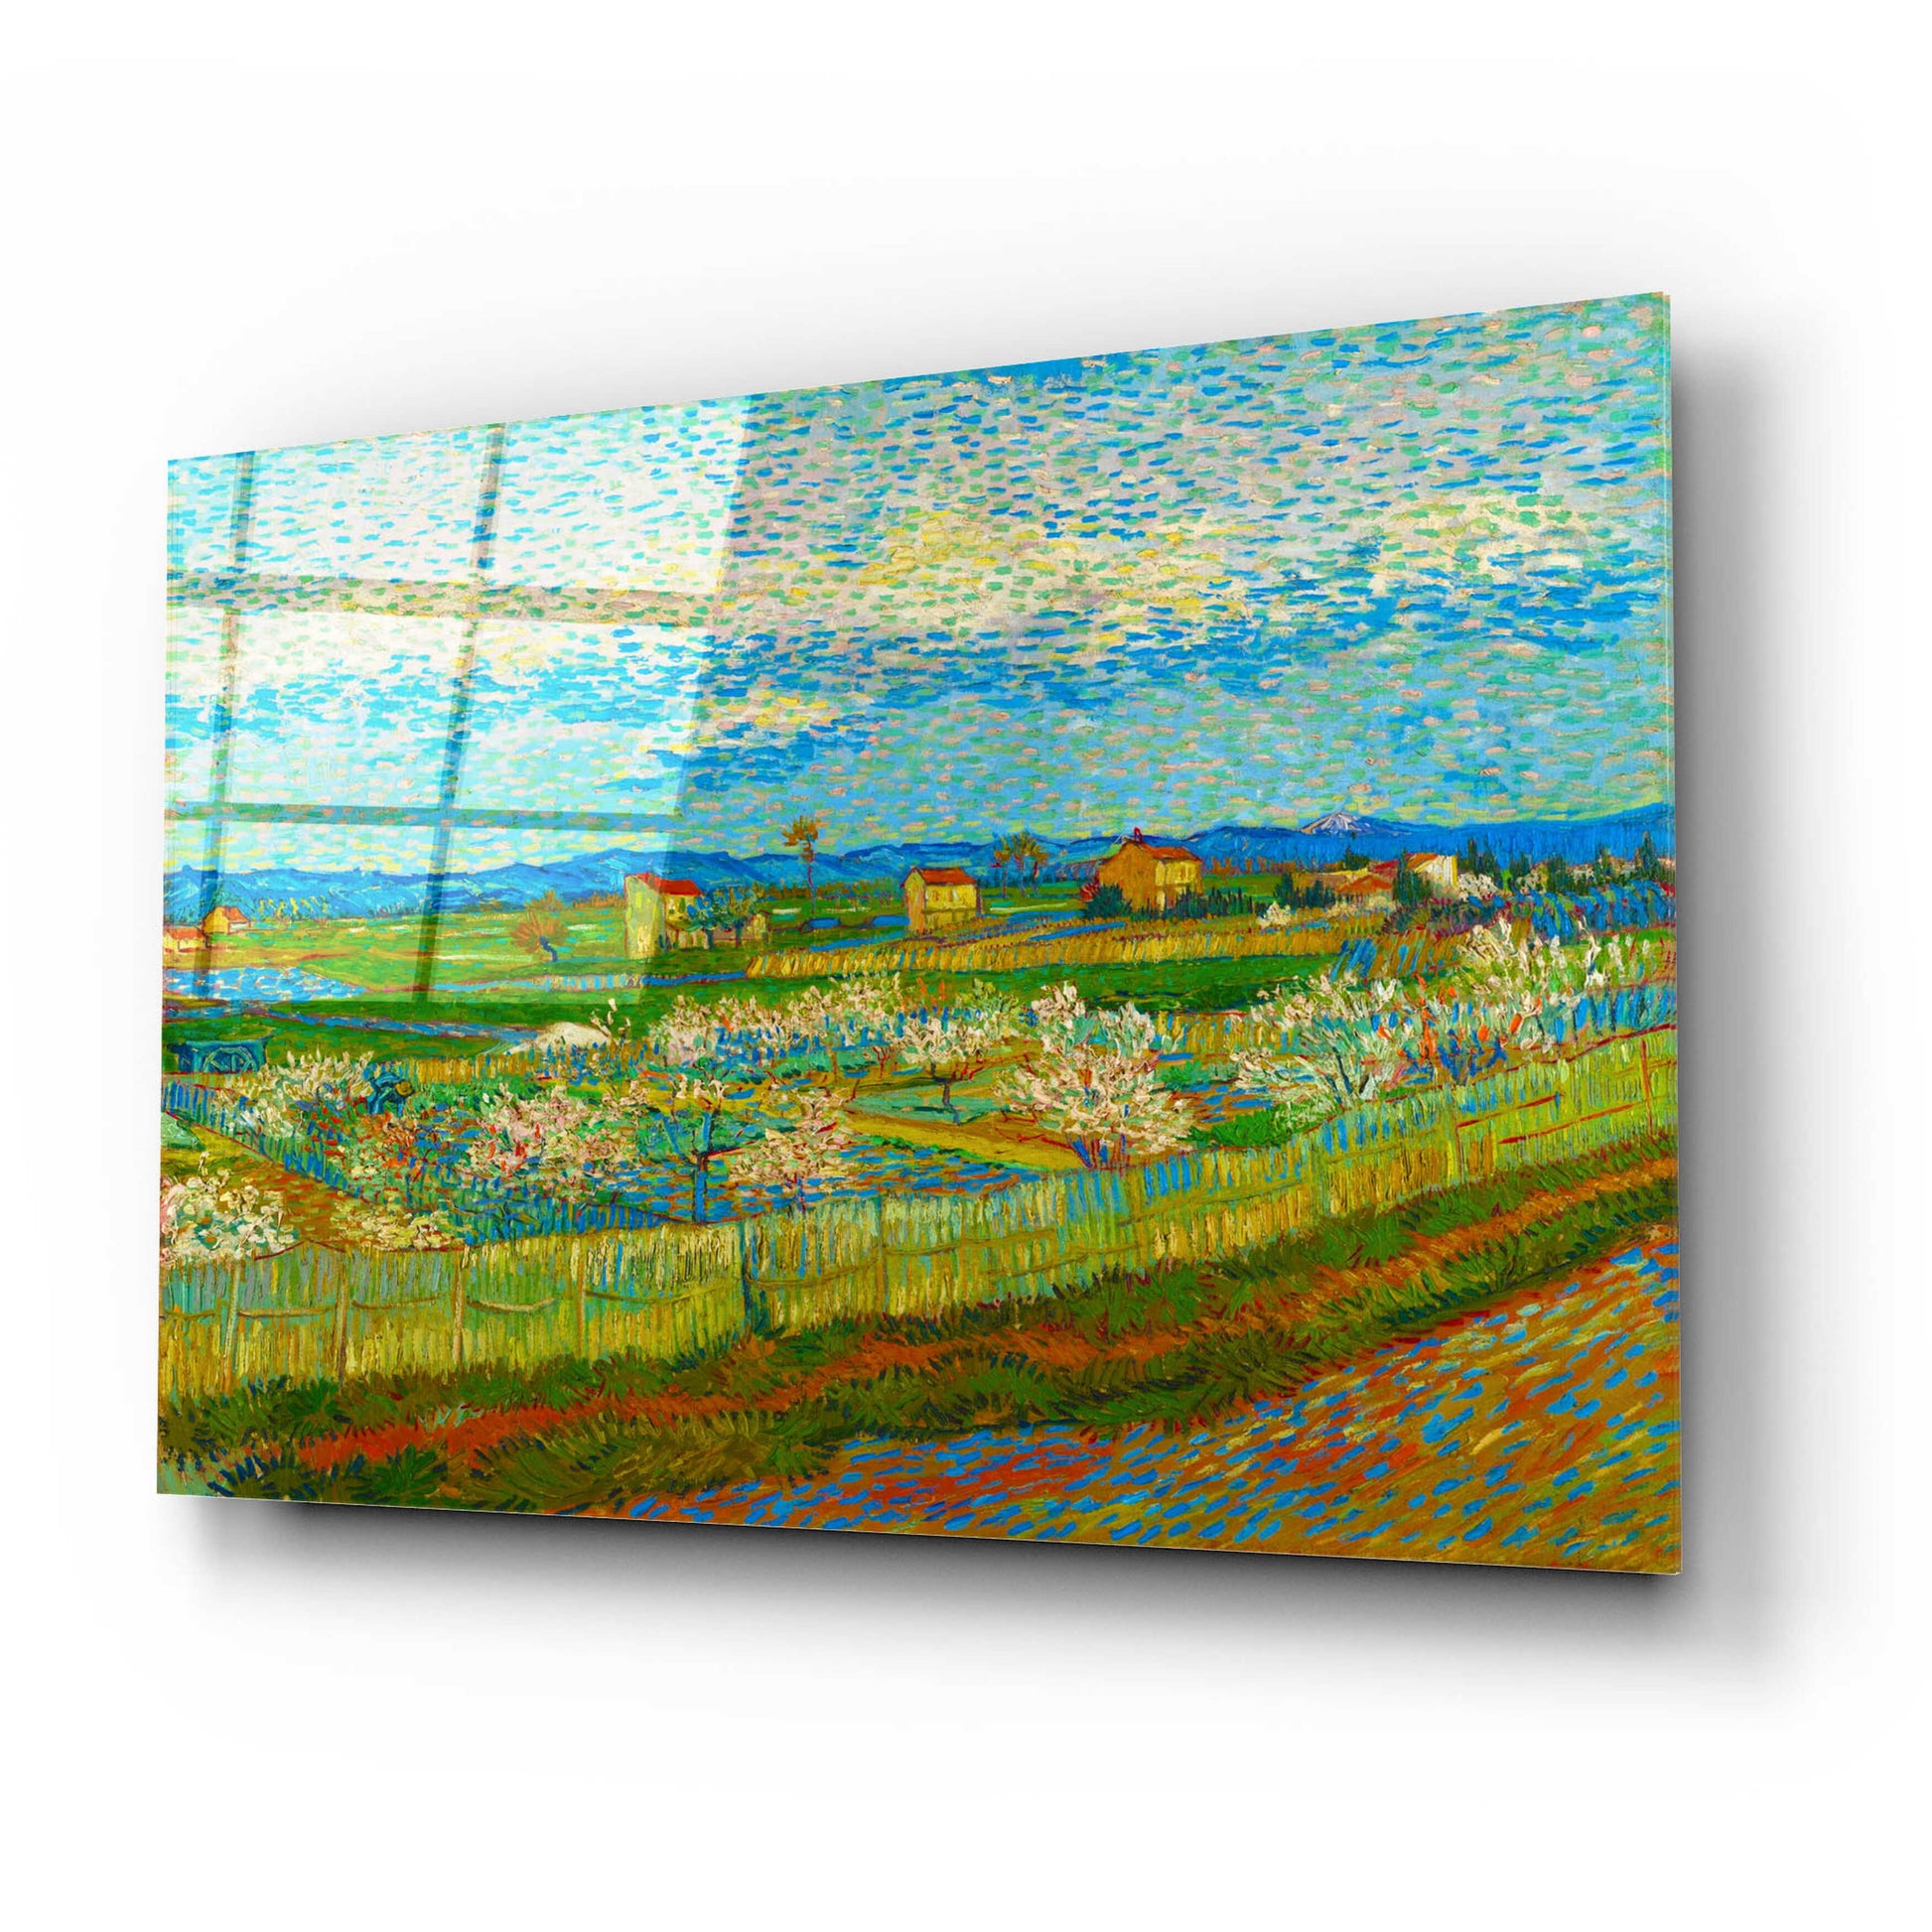 Epic Art 'Peach Trees In Blossom' by Vincent Van Gogh, Acrylic Glass Wall Art,24x16